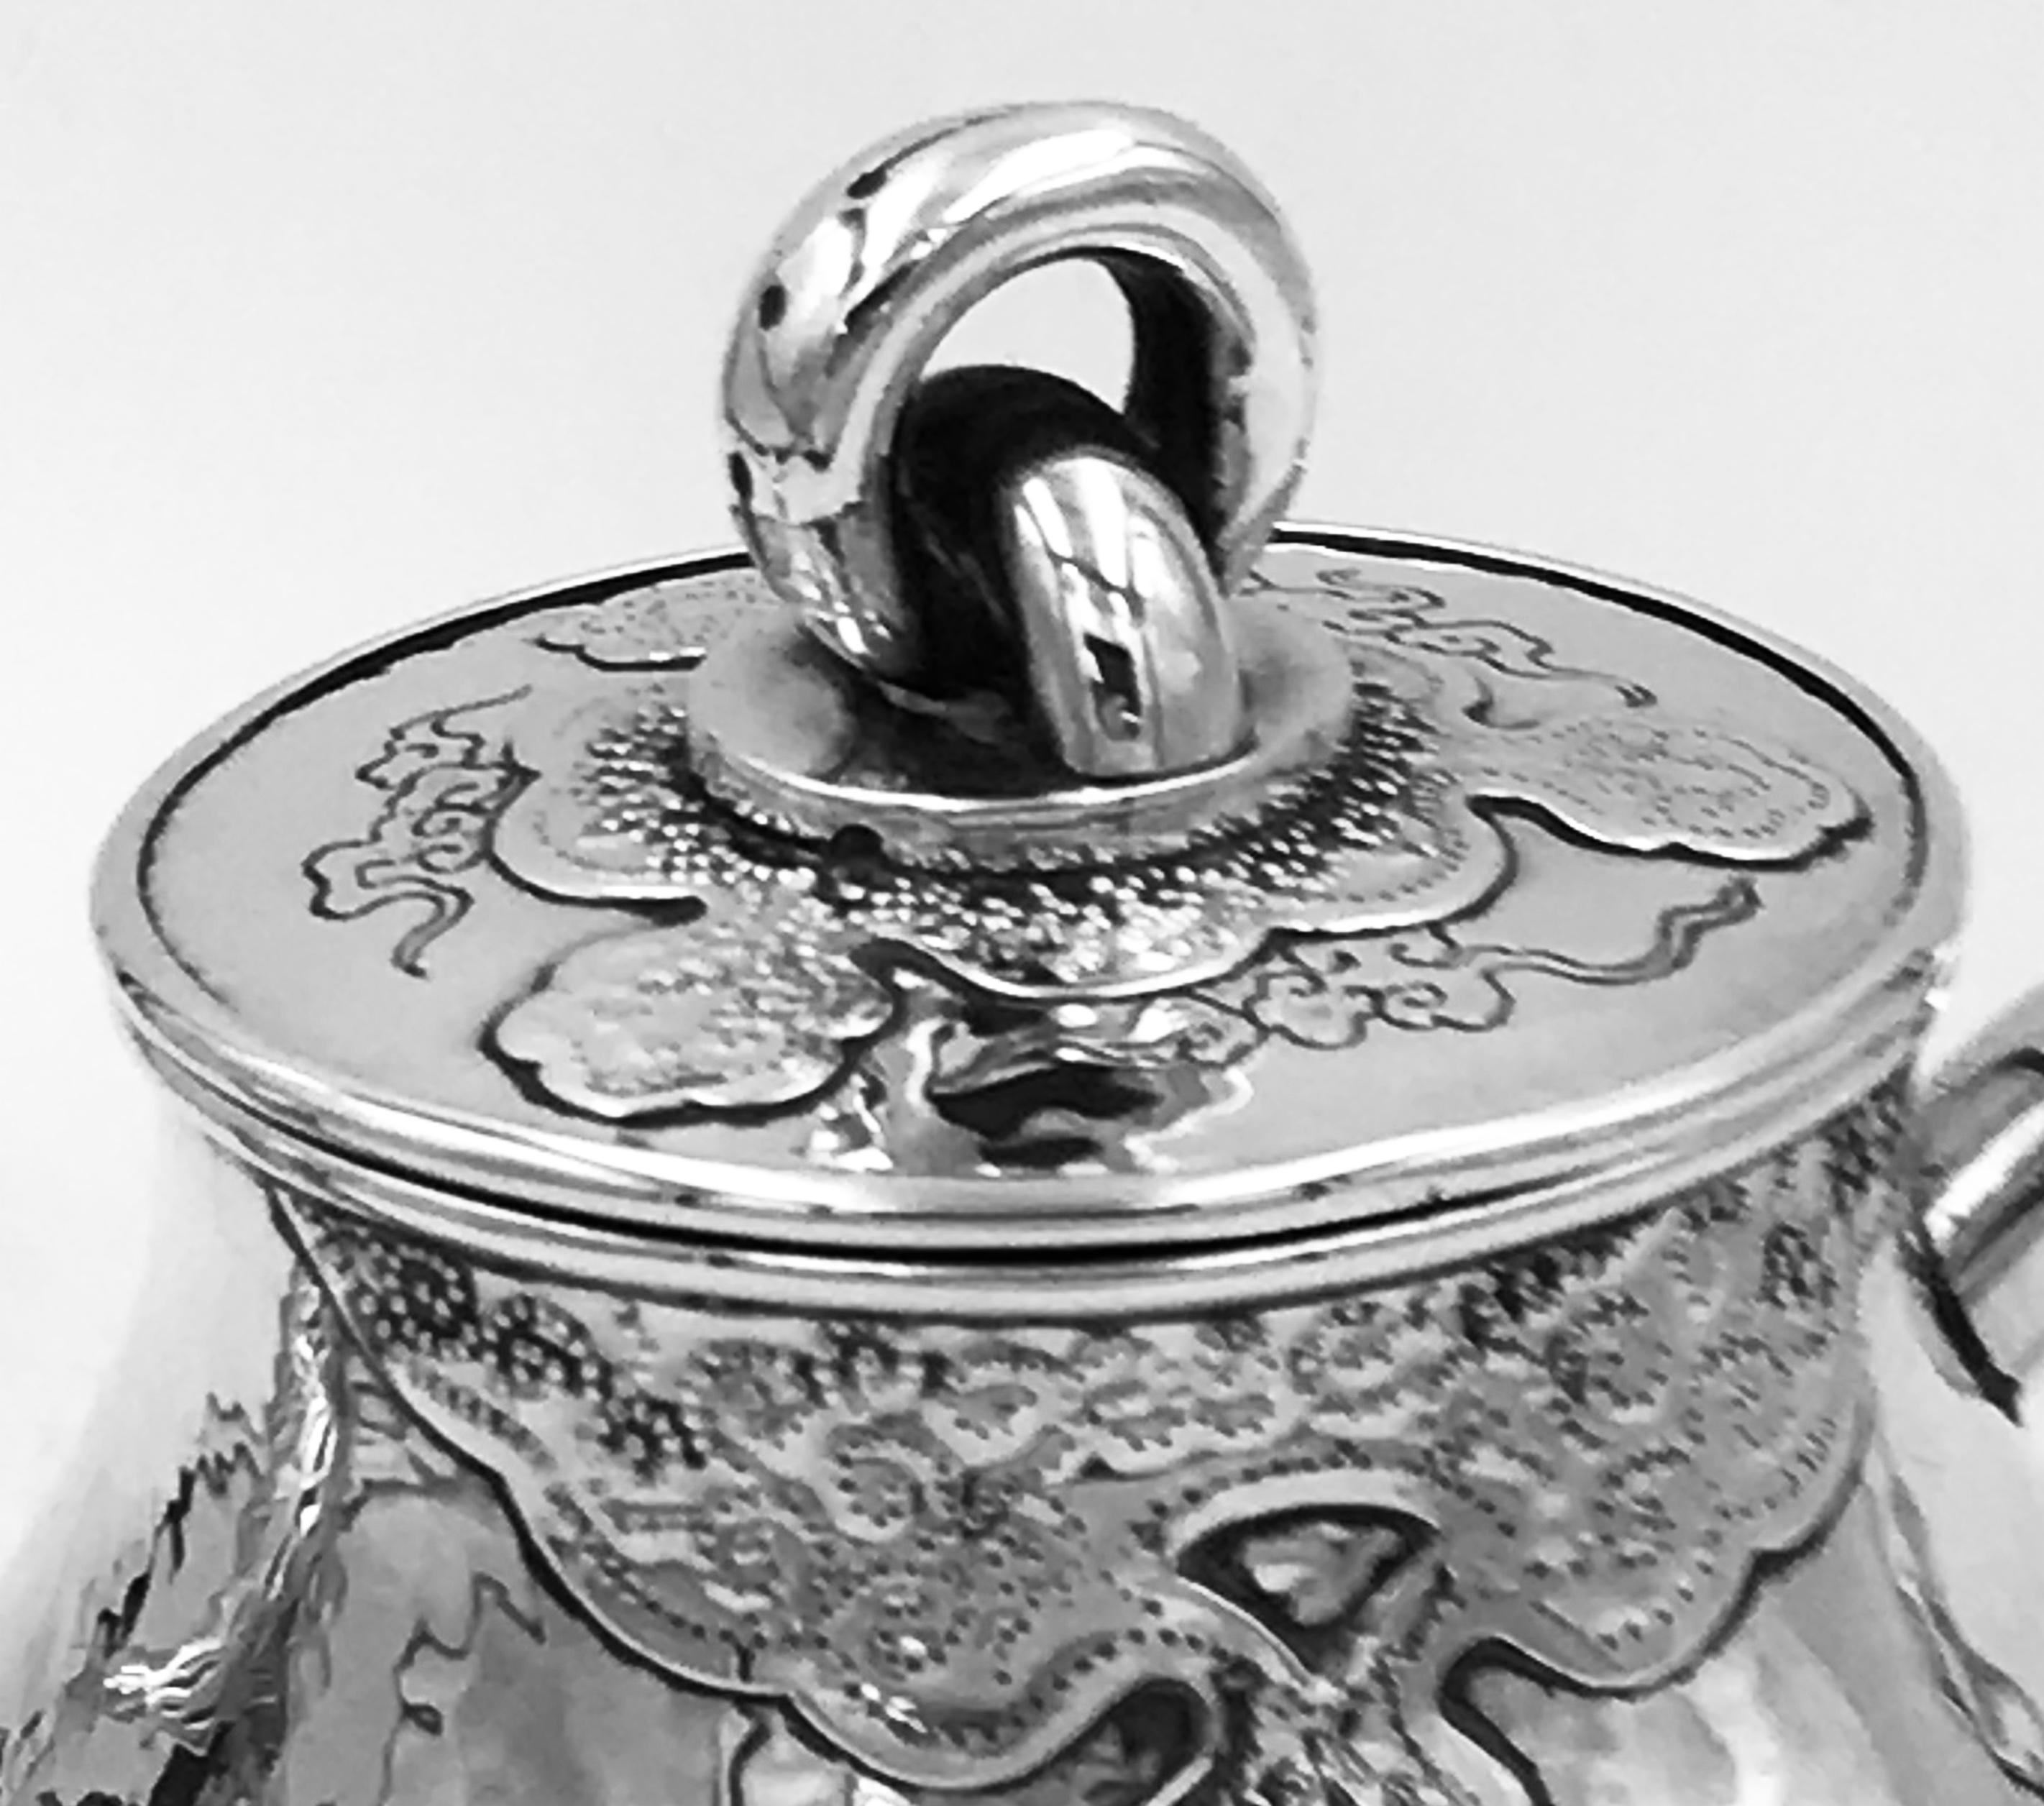 Chinese Export Chinese Silver Teapot